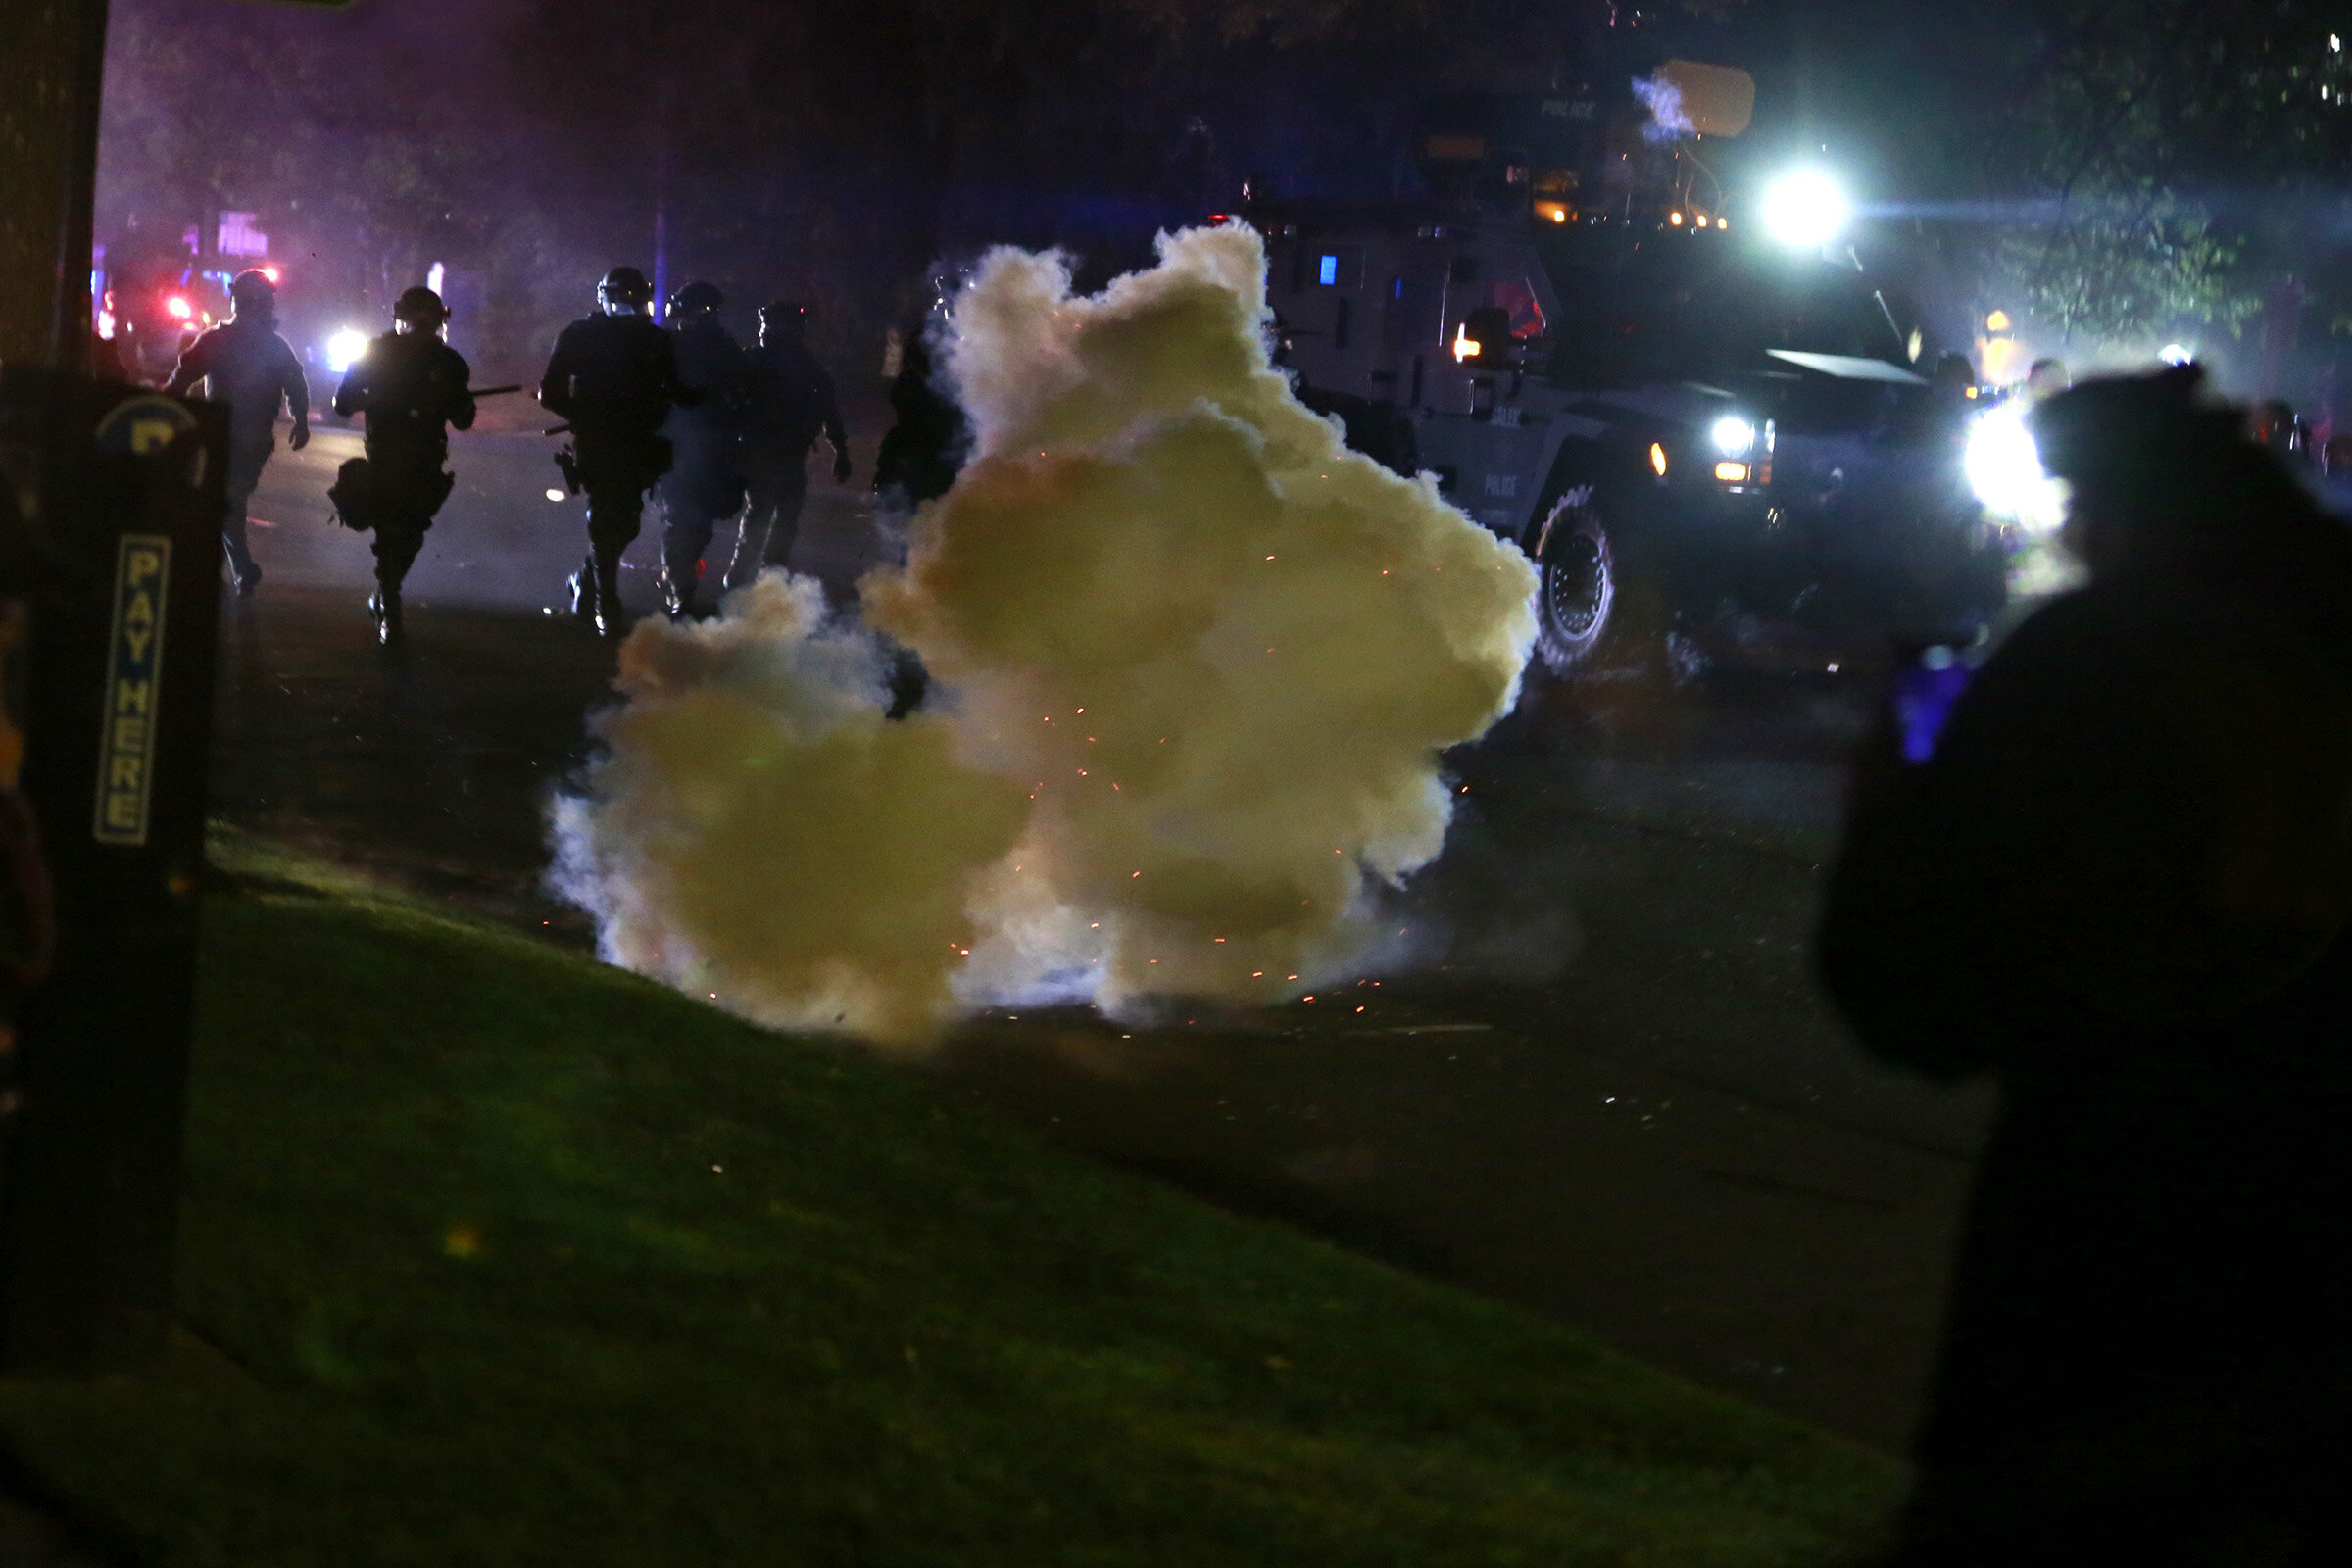  Police officers launch flashbang grenades to disperse demonstrators during a protest in Salem, Oregon, on Sunday, May 31, 2020. 